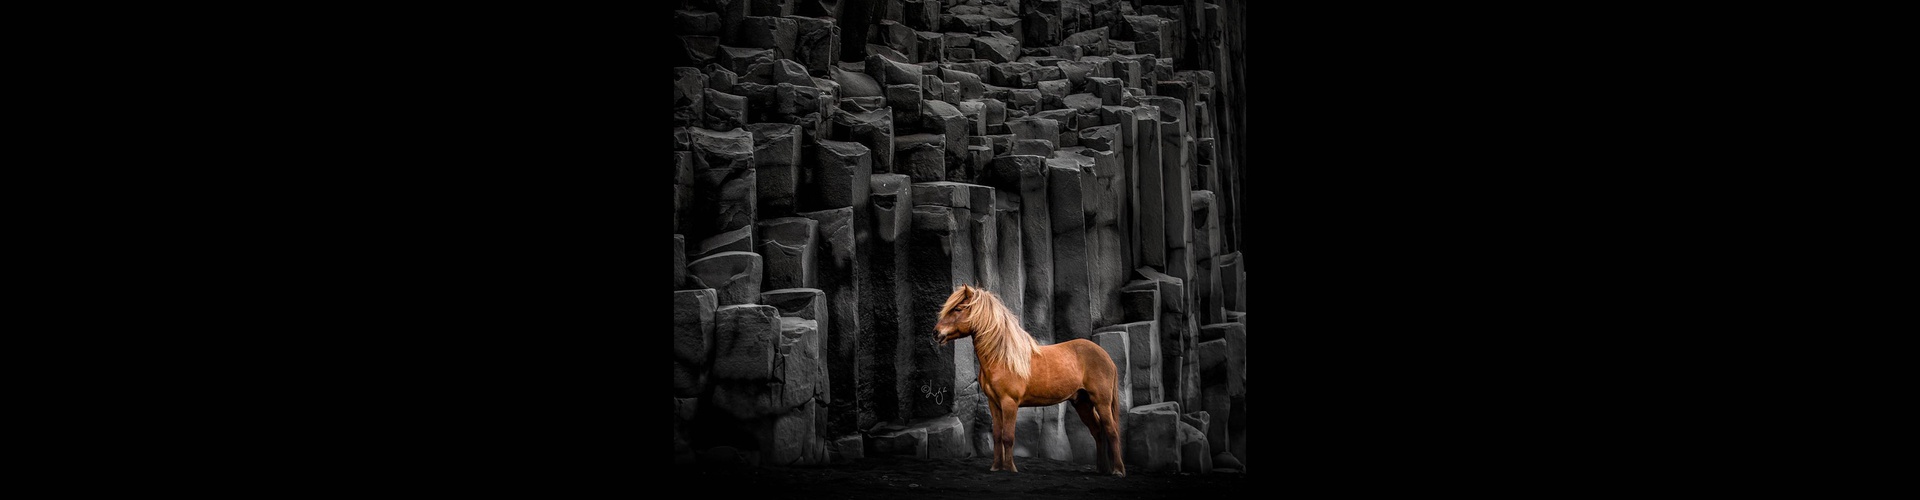 Gallery of photography by Liga Liepina - Iceland